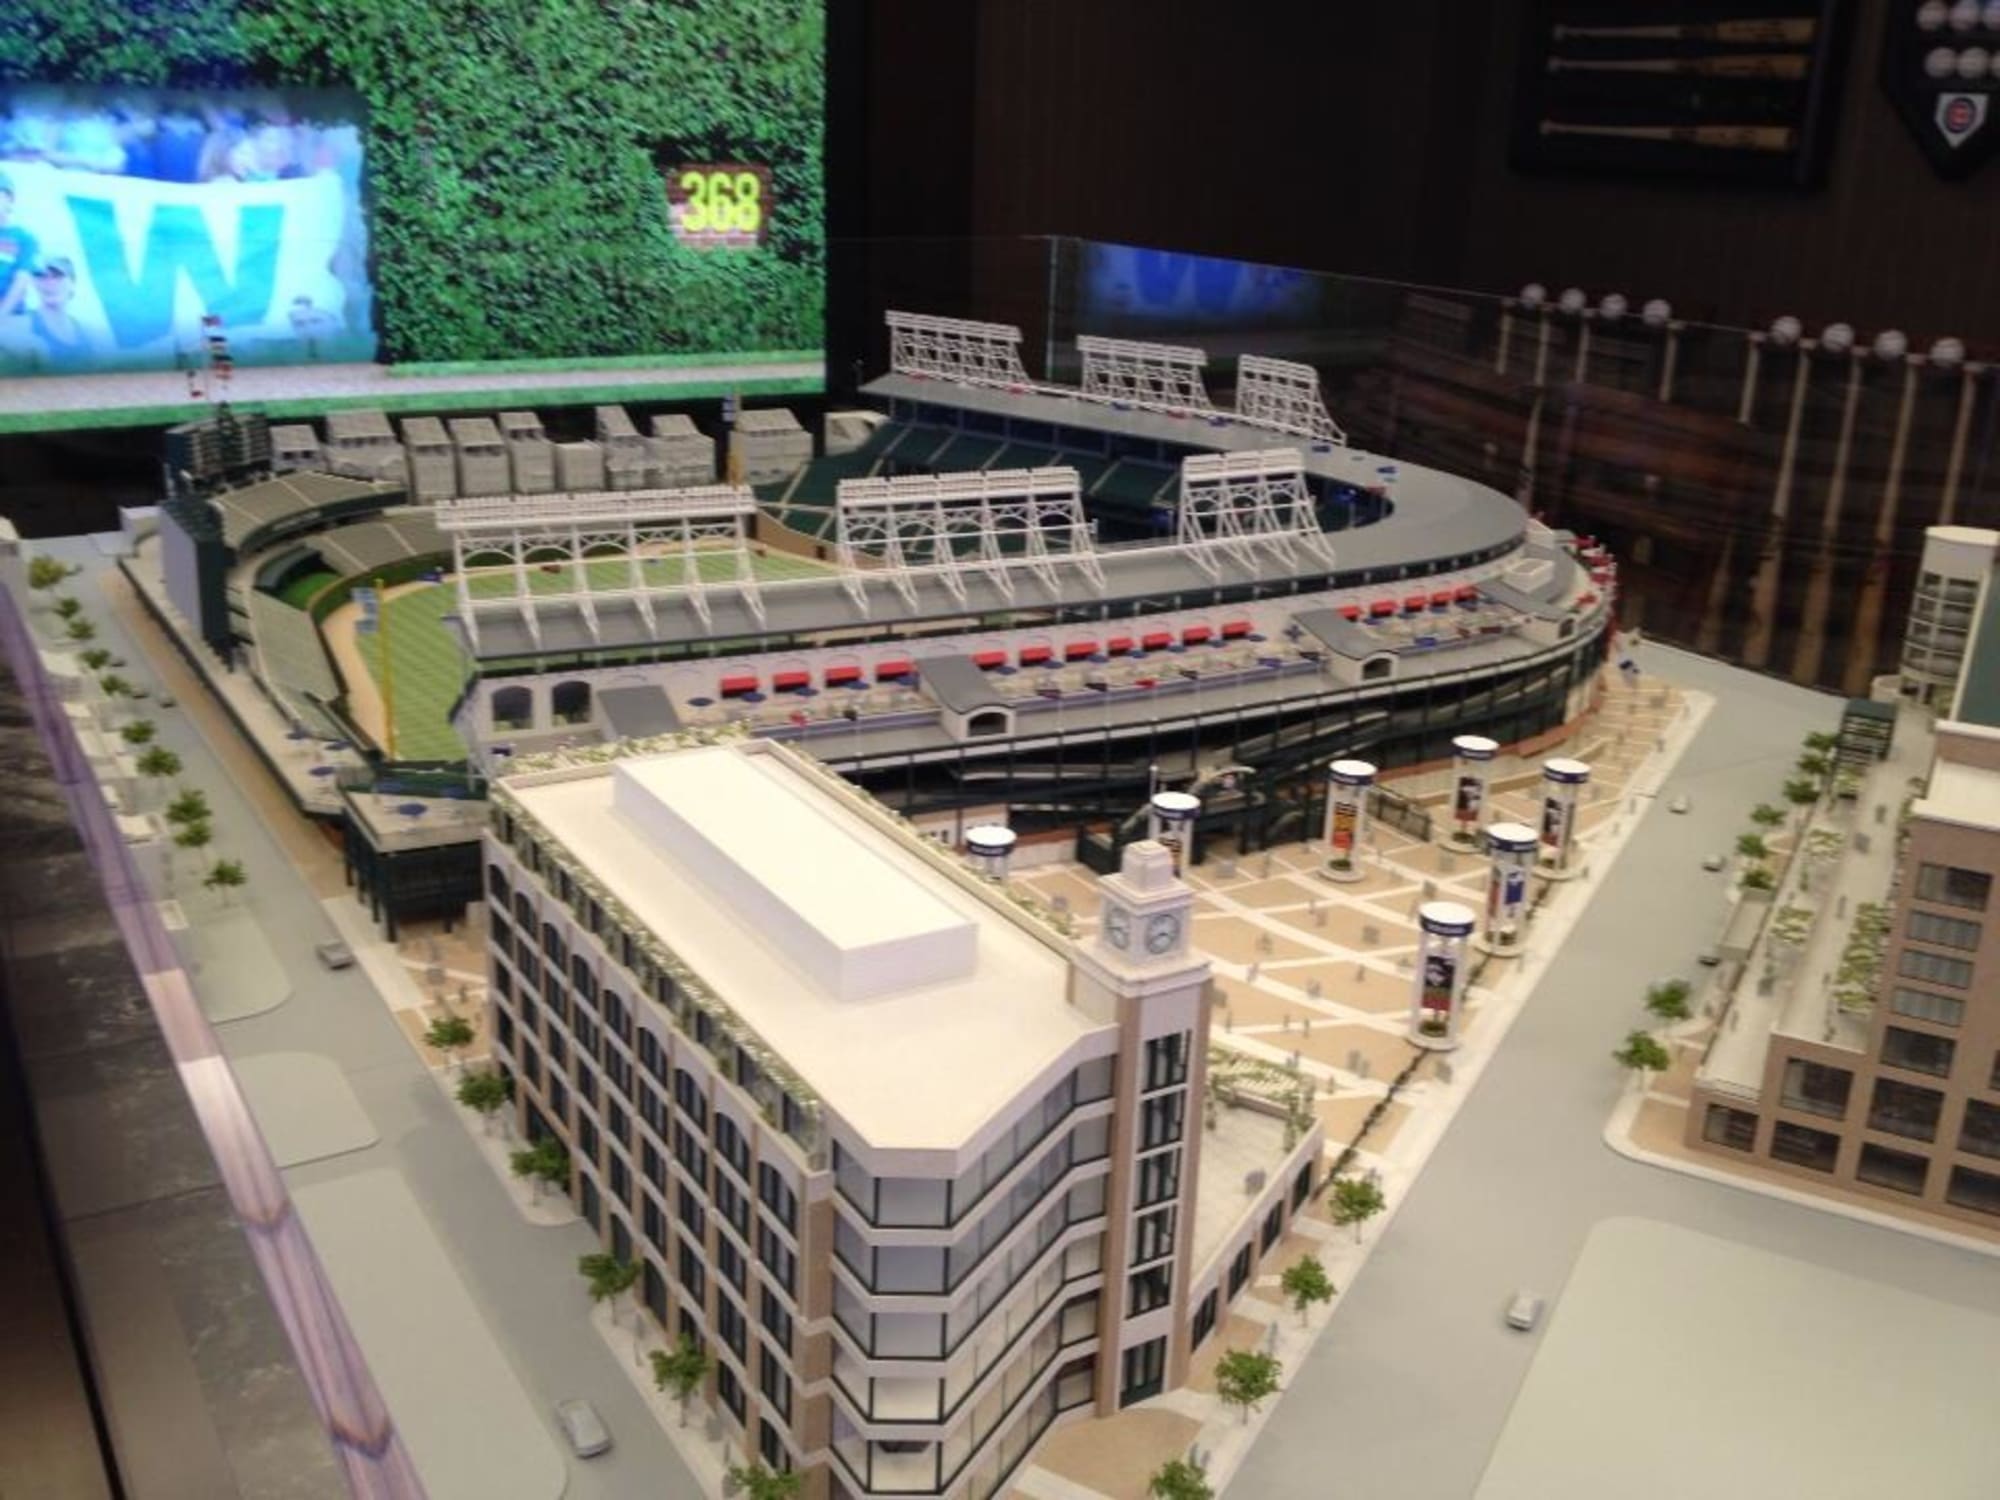 Chicago Cubs display new Wrigley Field renovation model (Photos)